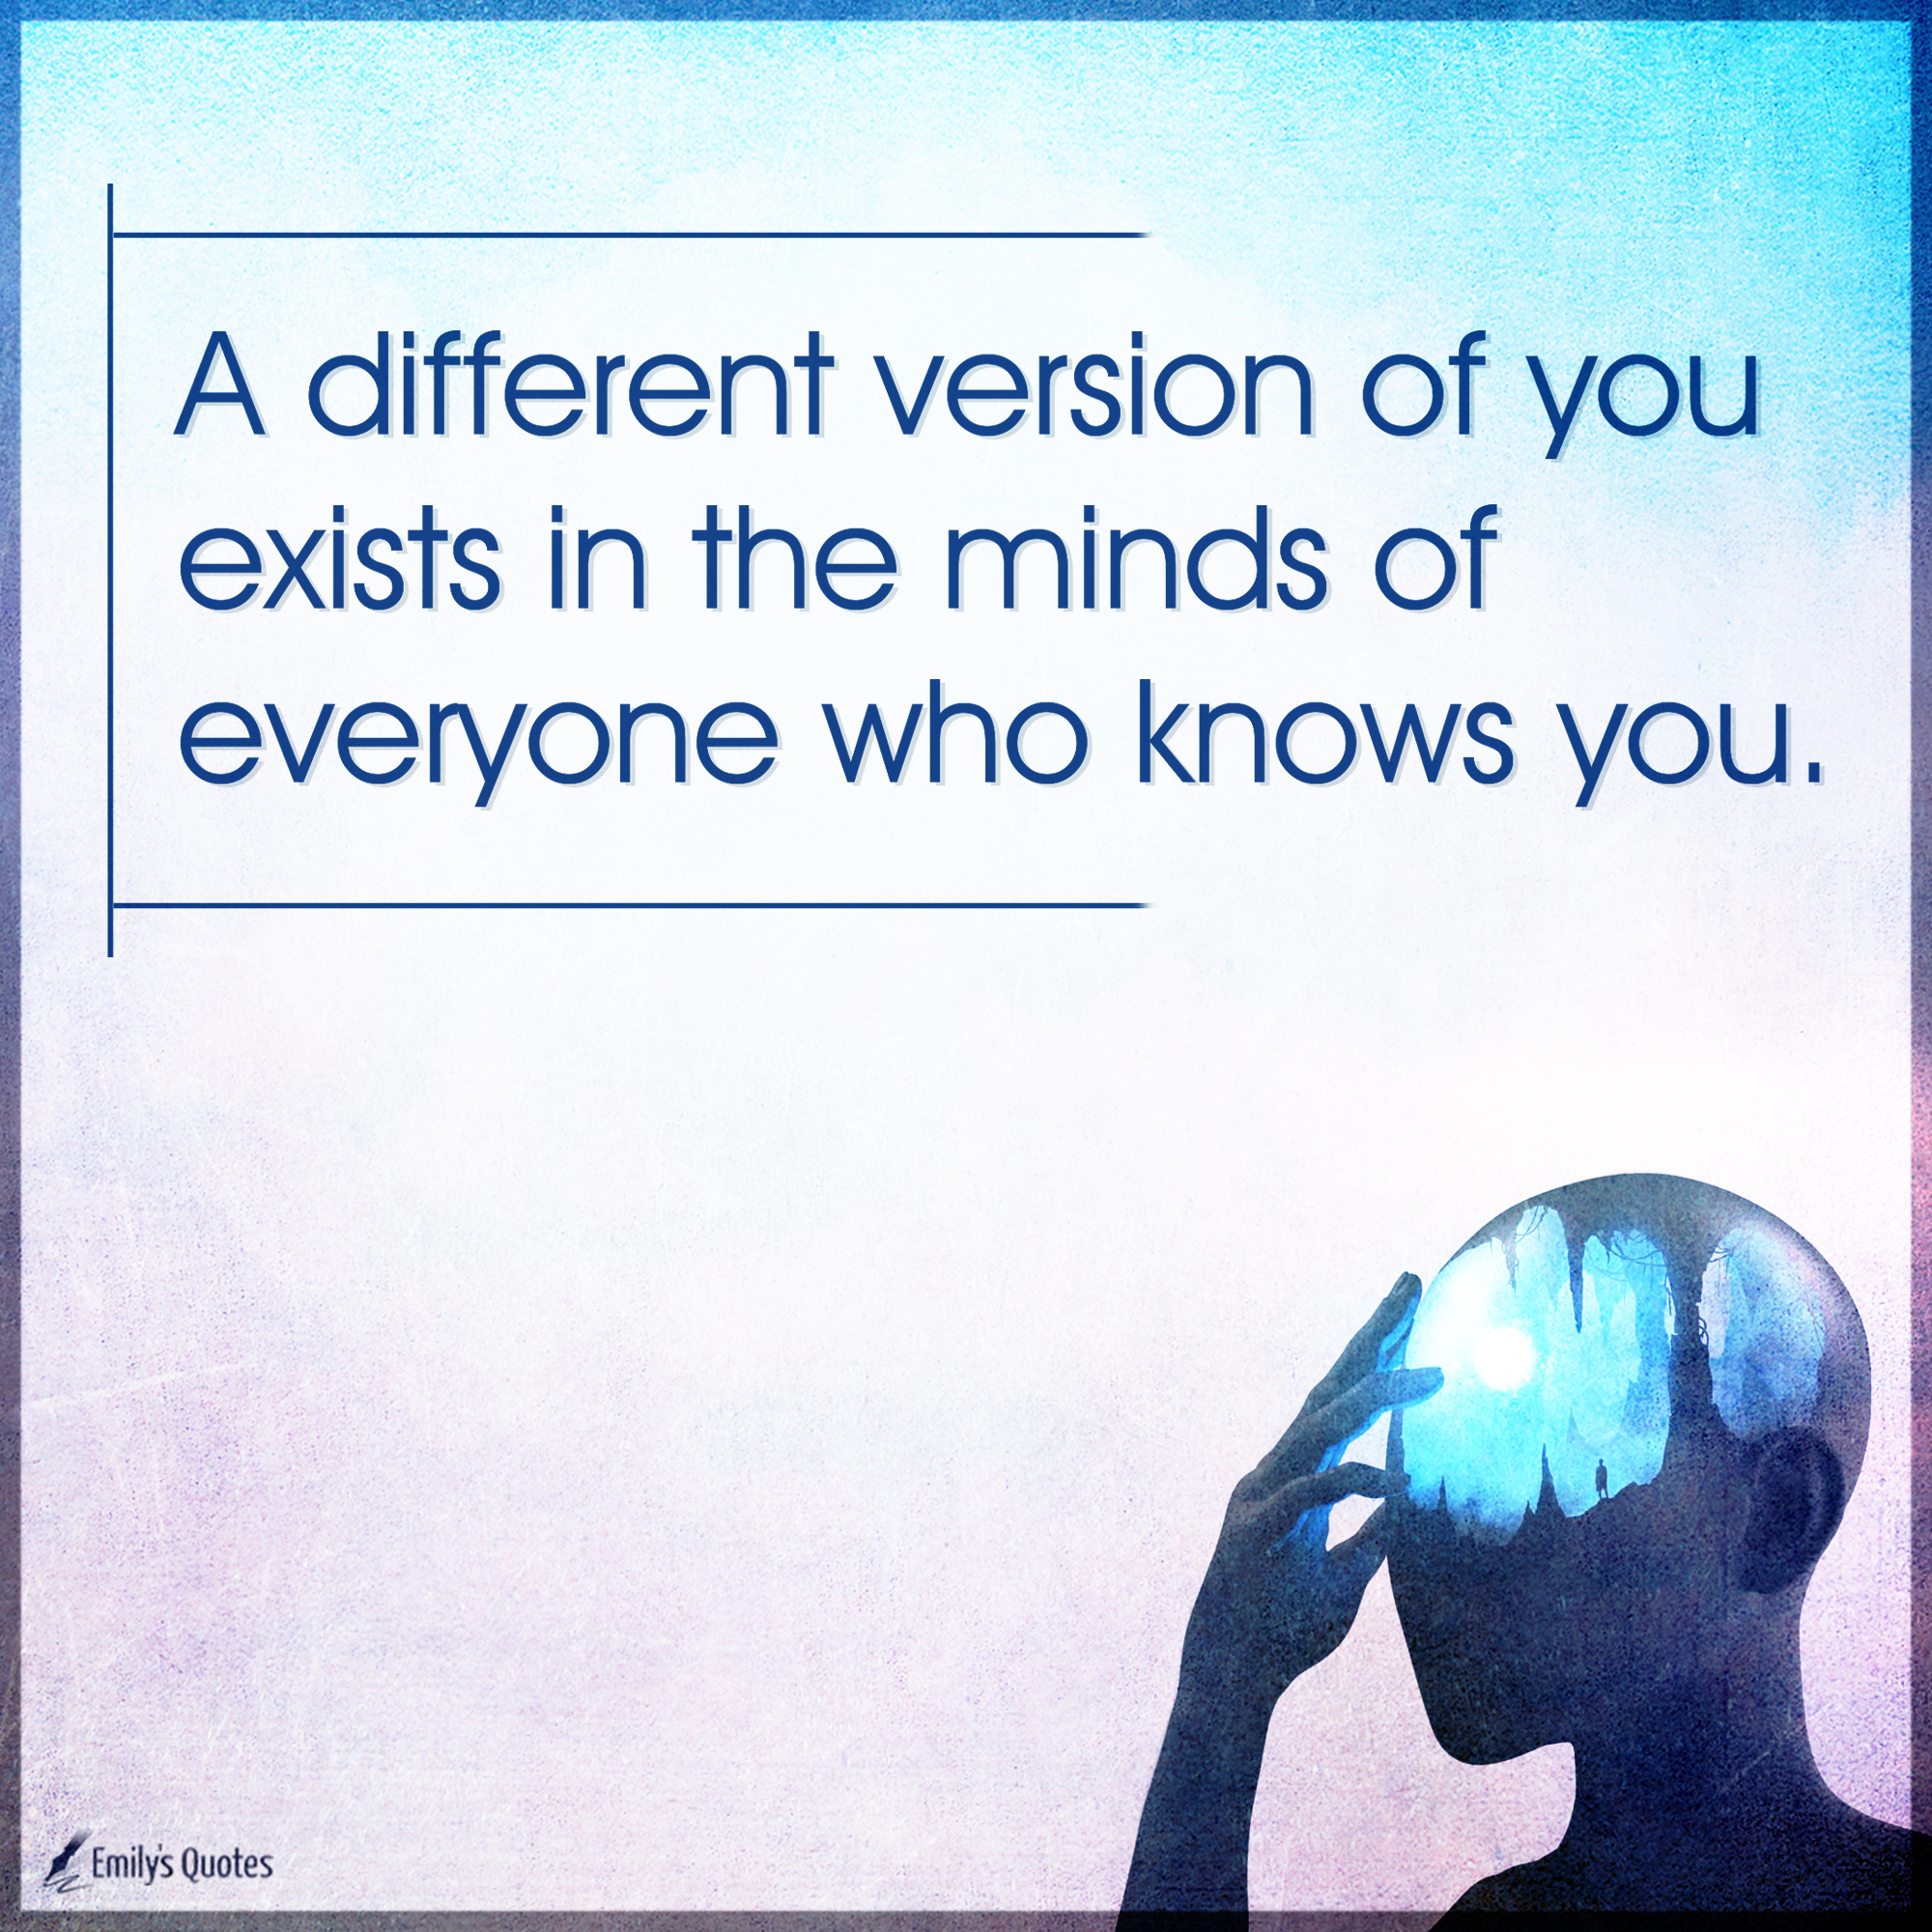 A different version of you exists in the minds of everyone who knows you